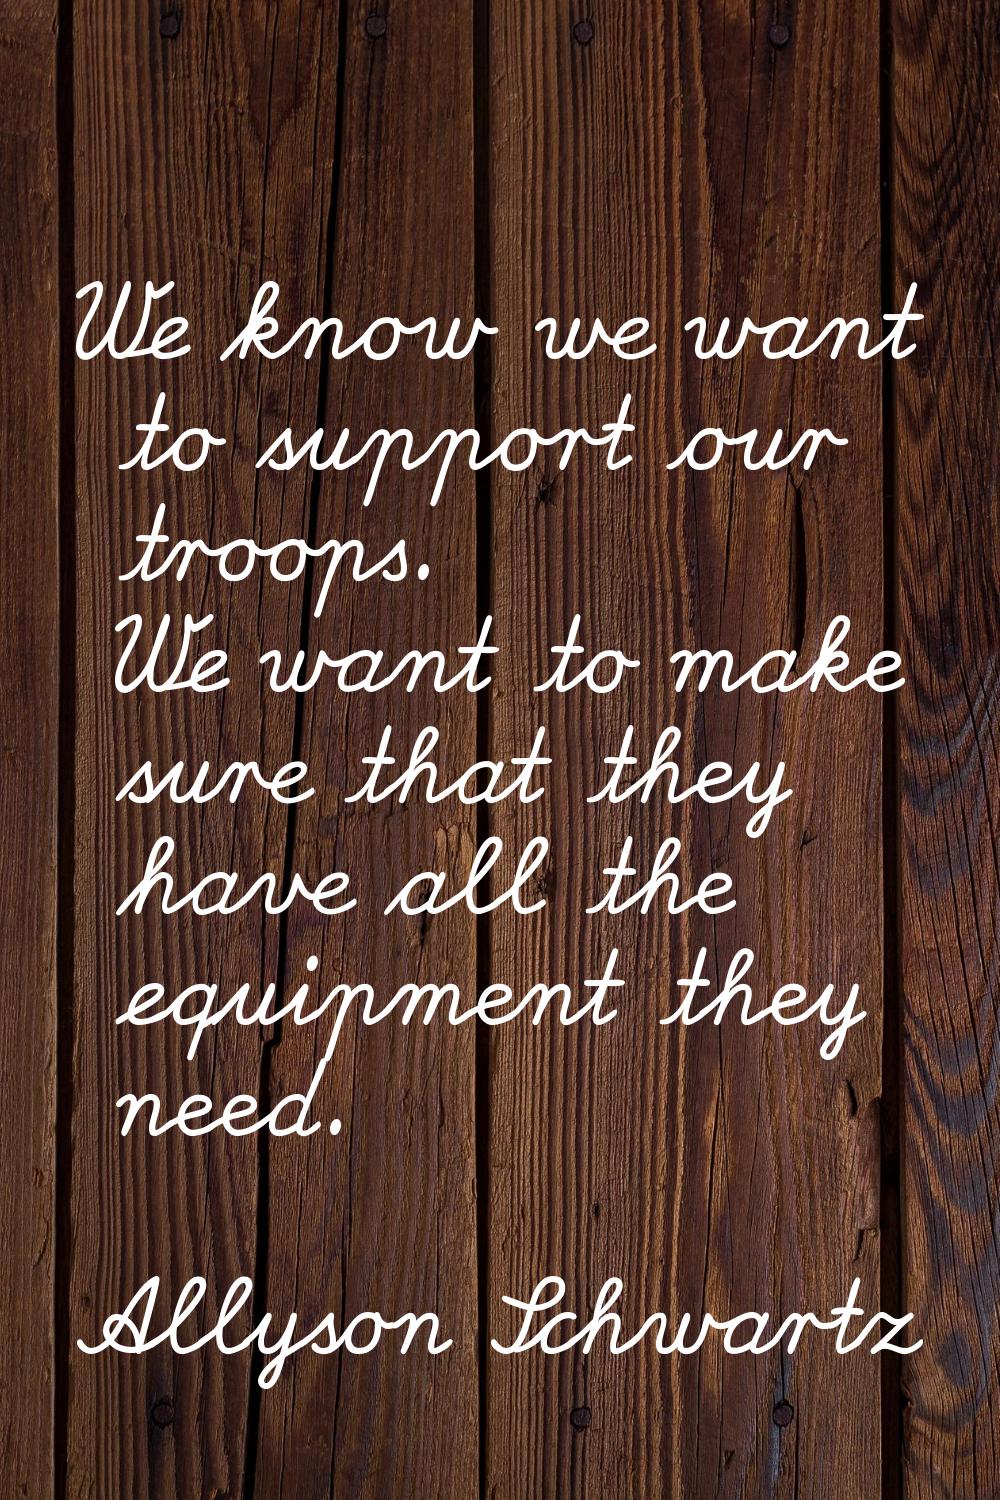 We know we want to support our troops. We want to make sure that they have all the equipment they n